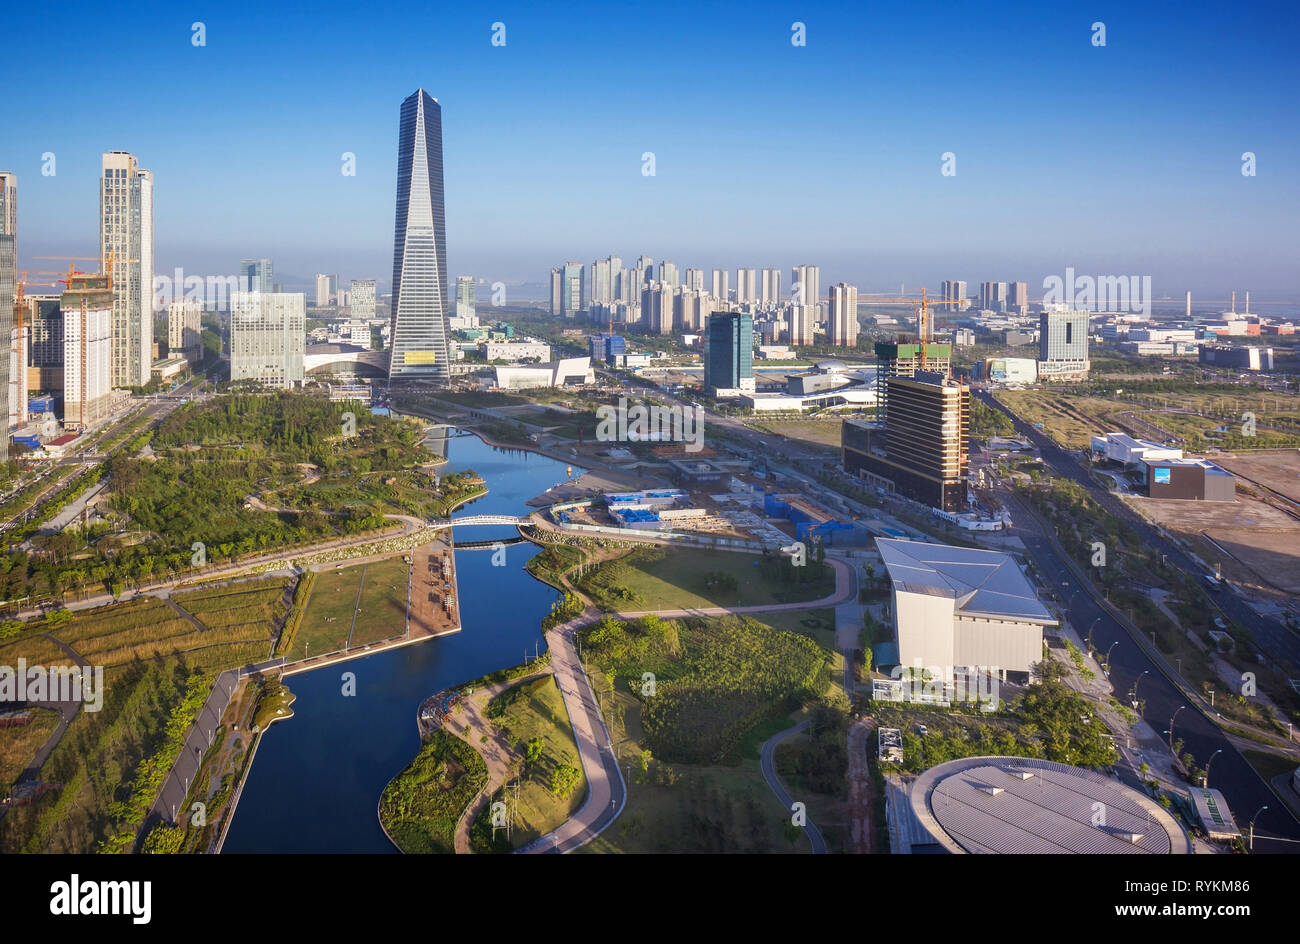 Korea city, Cityscape at Songdo Central Park in Songdo International Business District, Incheon Stock Photo